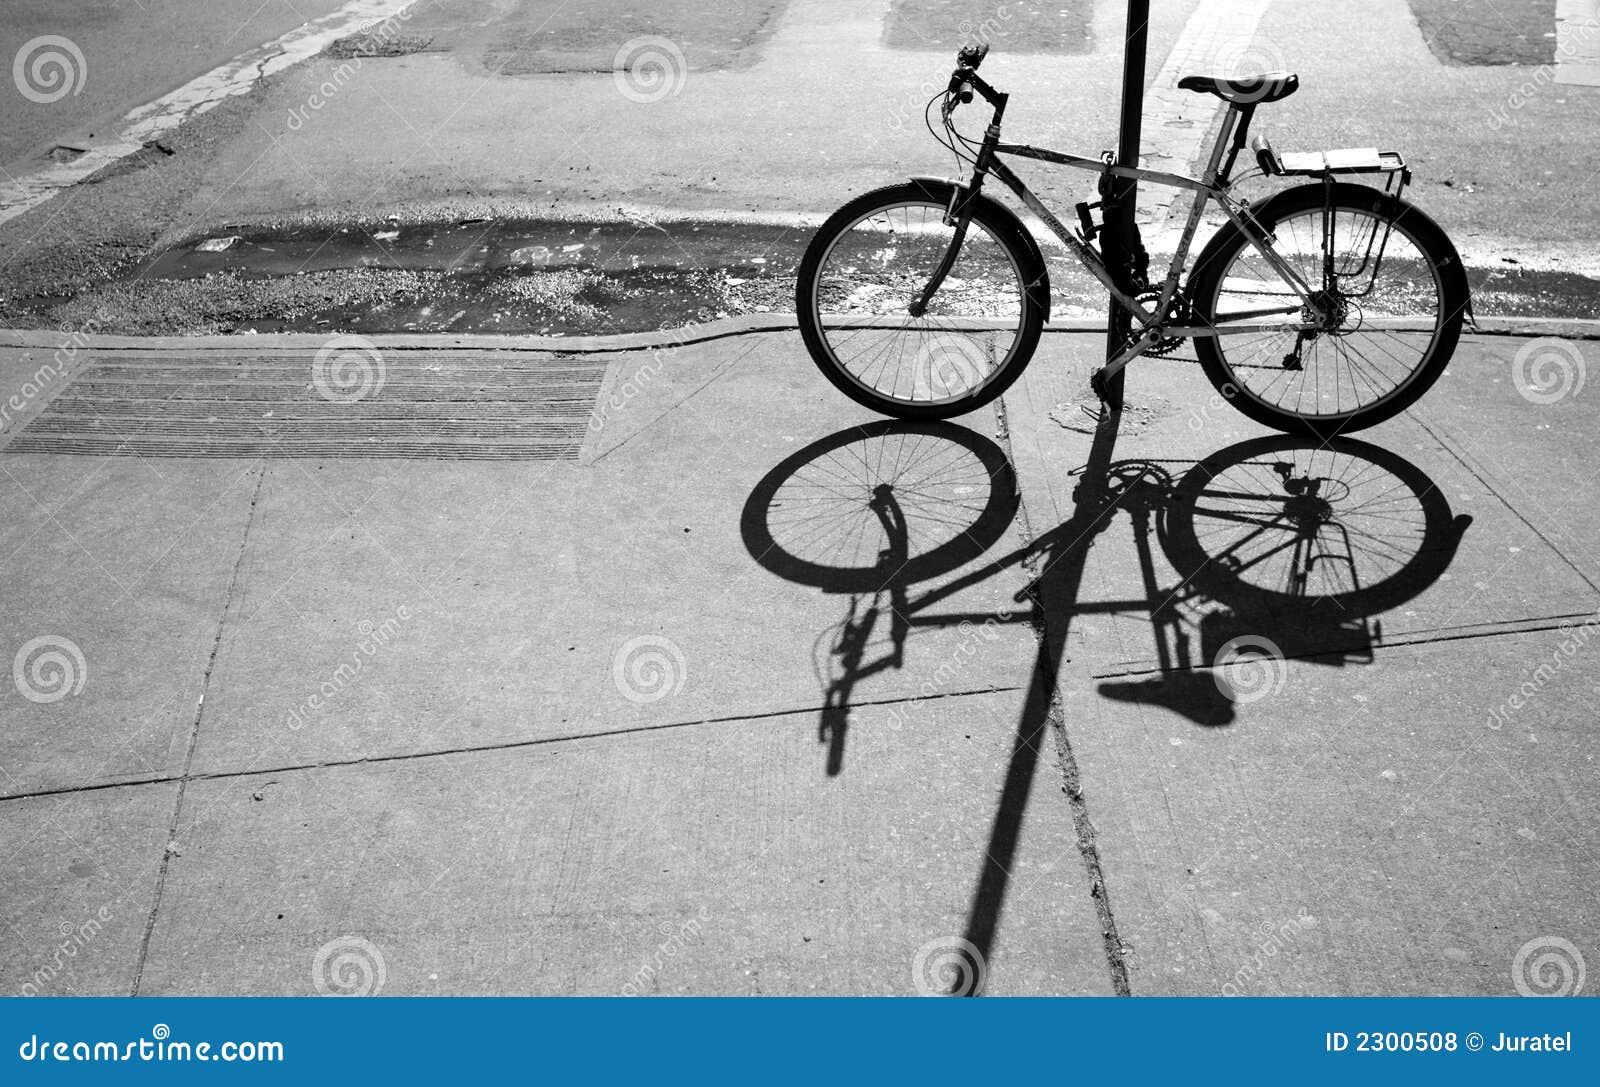 Bike And Shadow Royalty Free Stock Photos - Image: 2300508